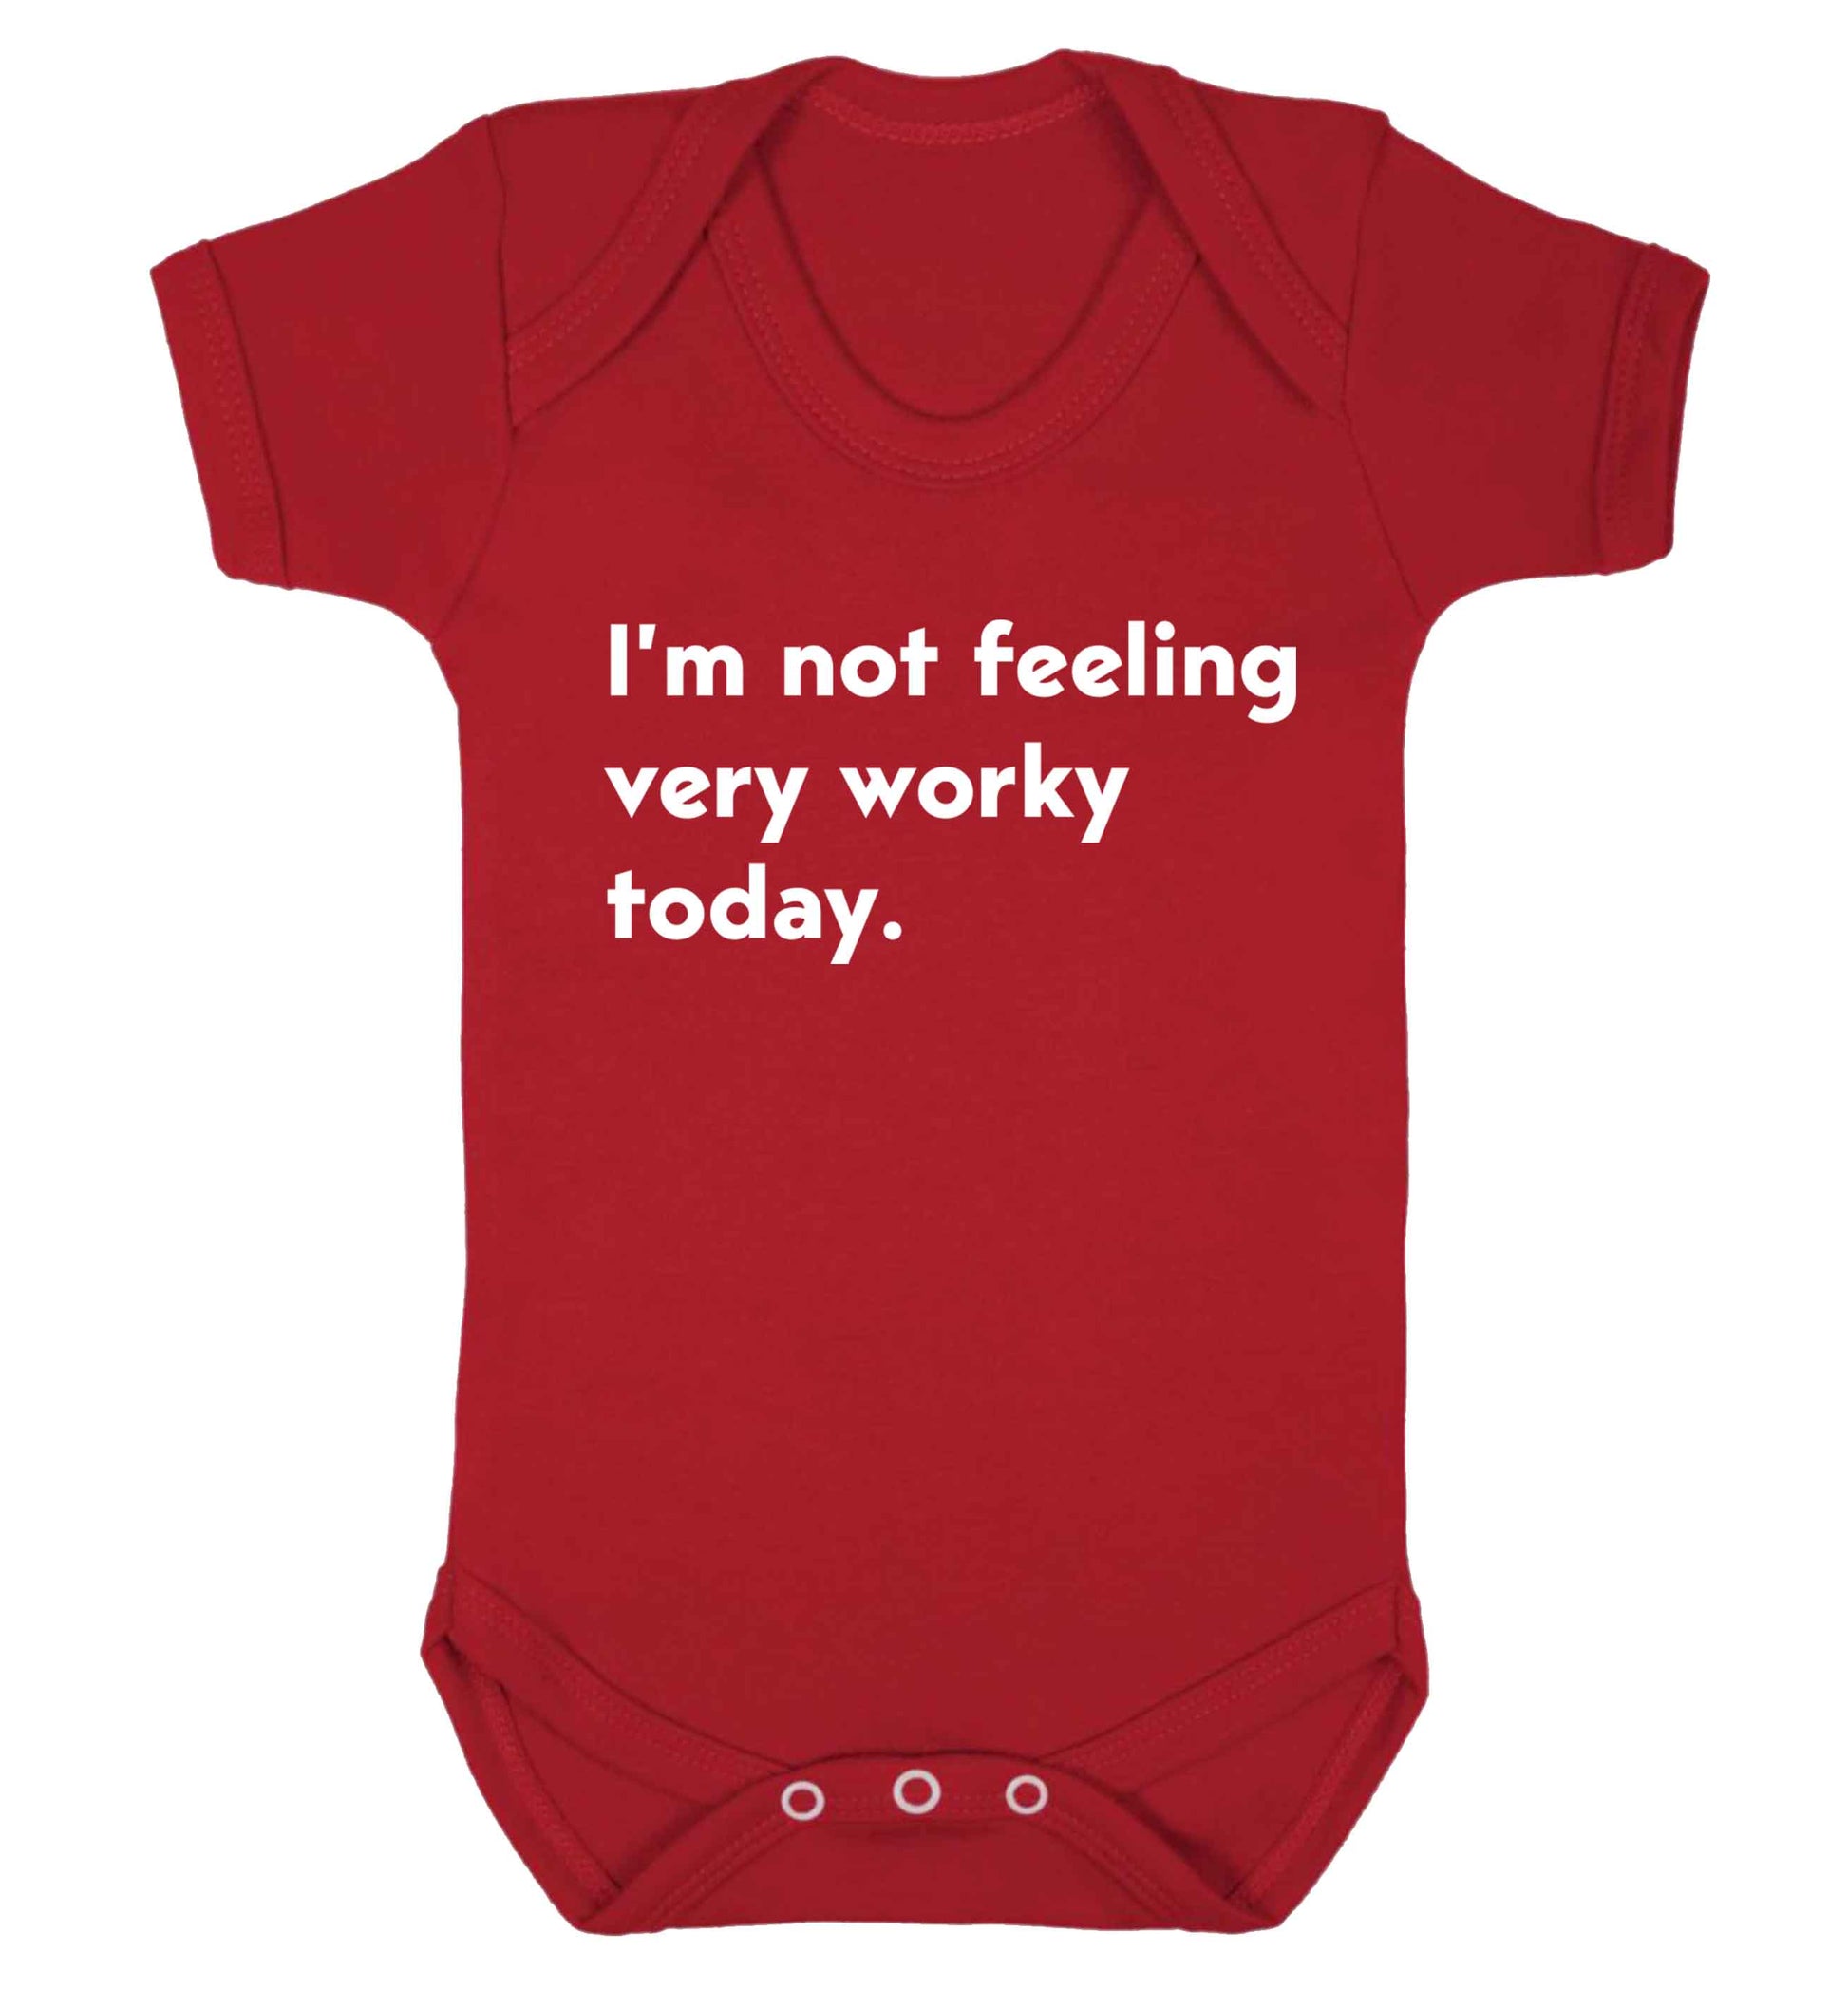 I'm not feeling very worky today Baby Vest red 18-24 months